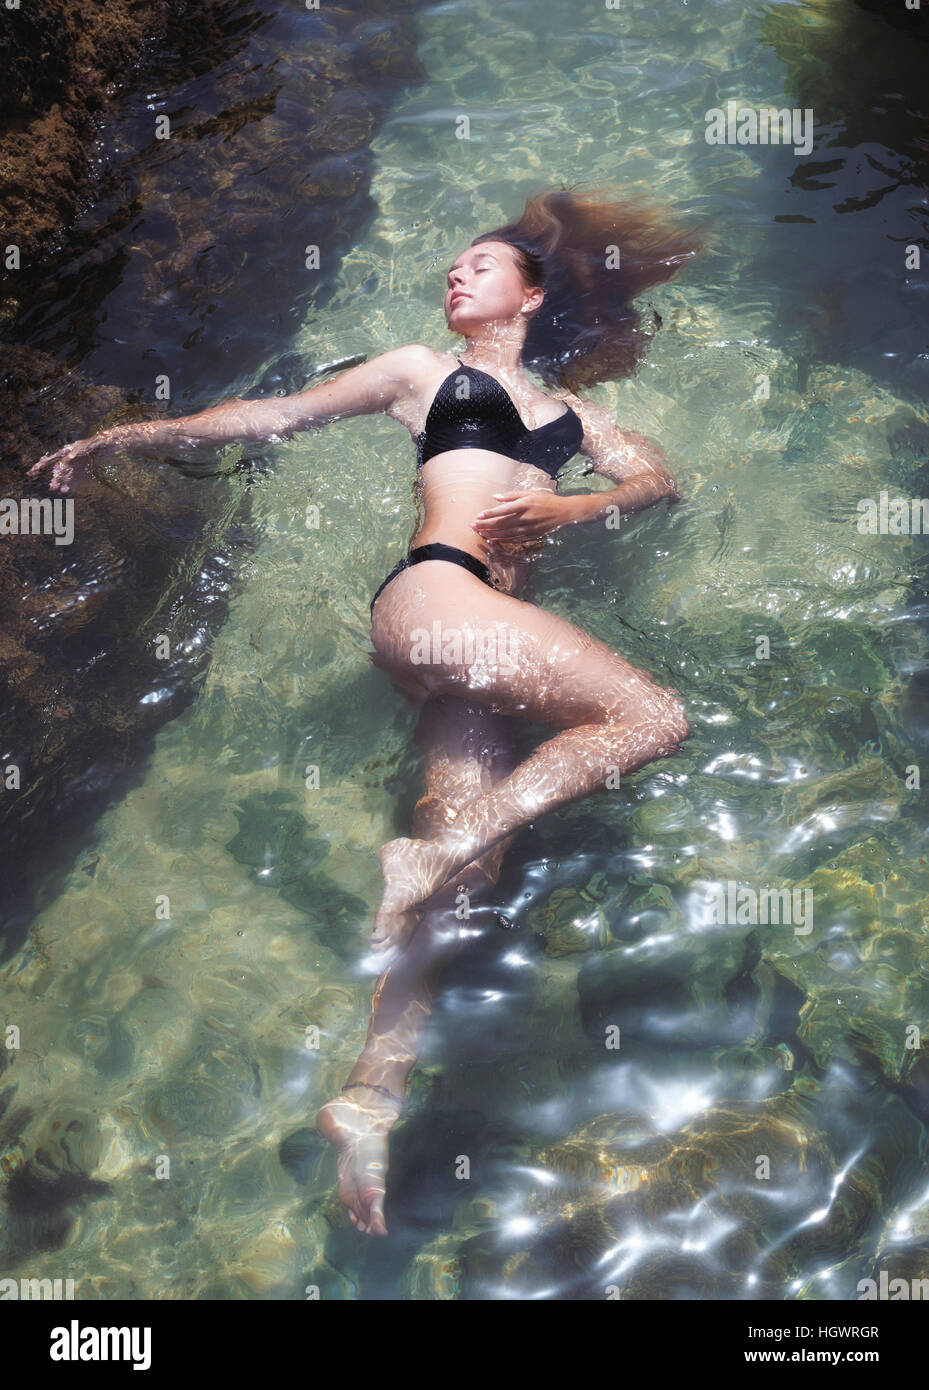 Young woman relaxing in water. Stock Photo